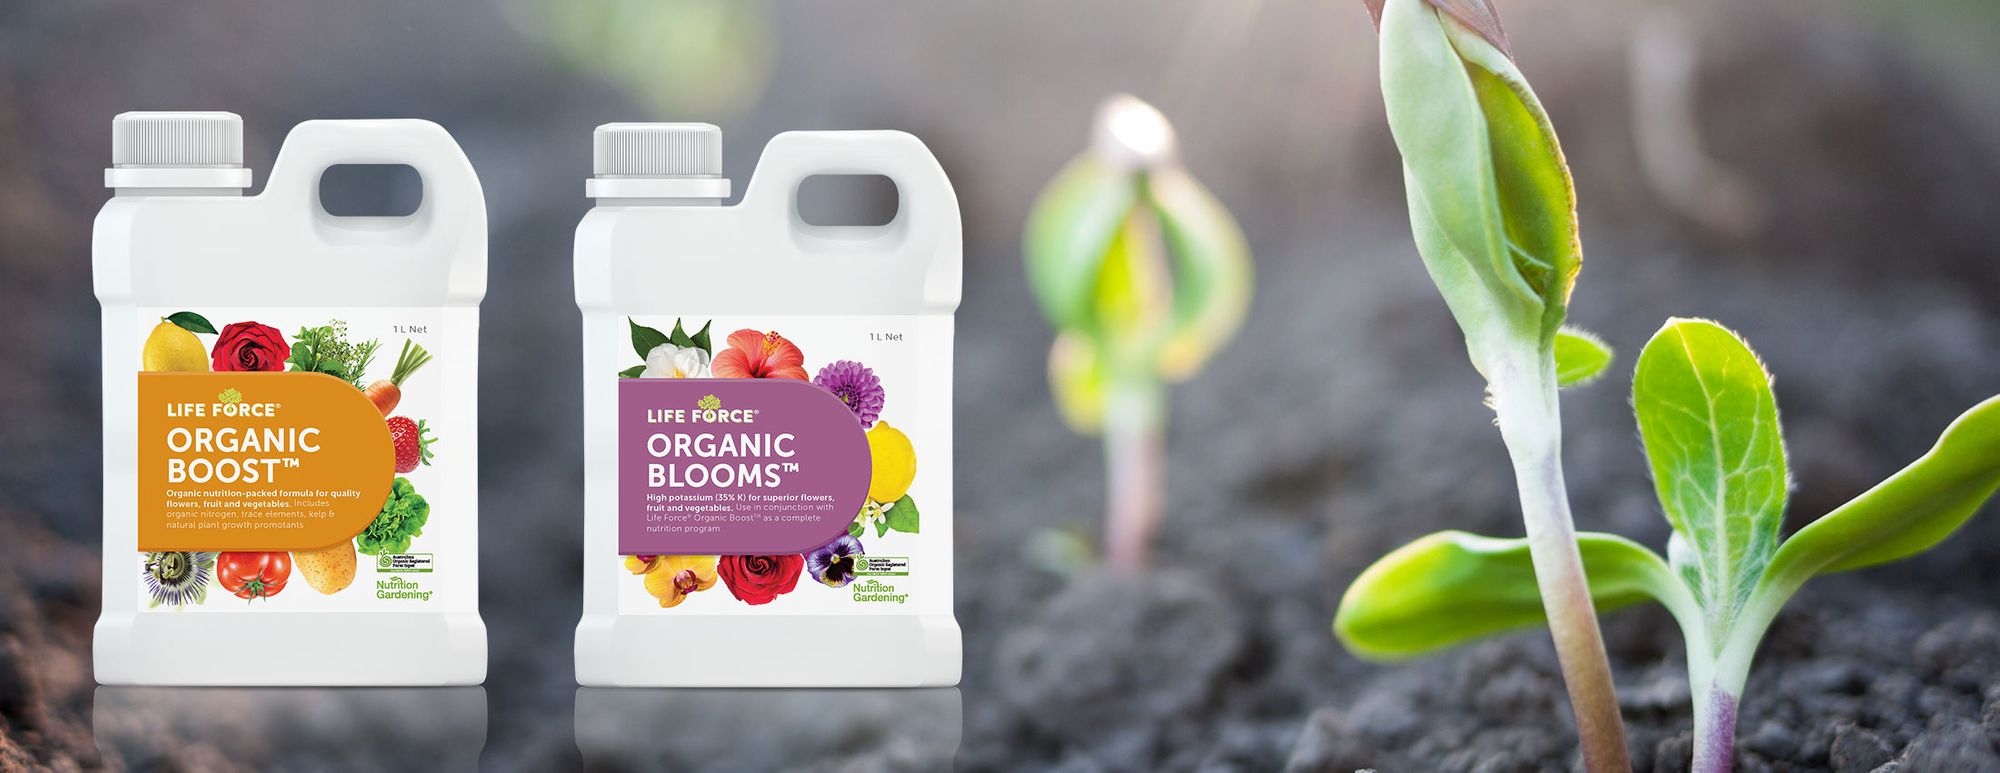 NTS Launches Organic Home Garden Products